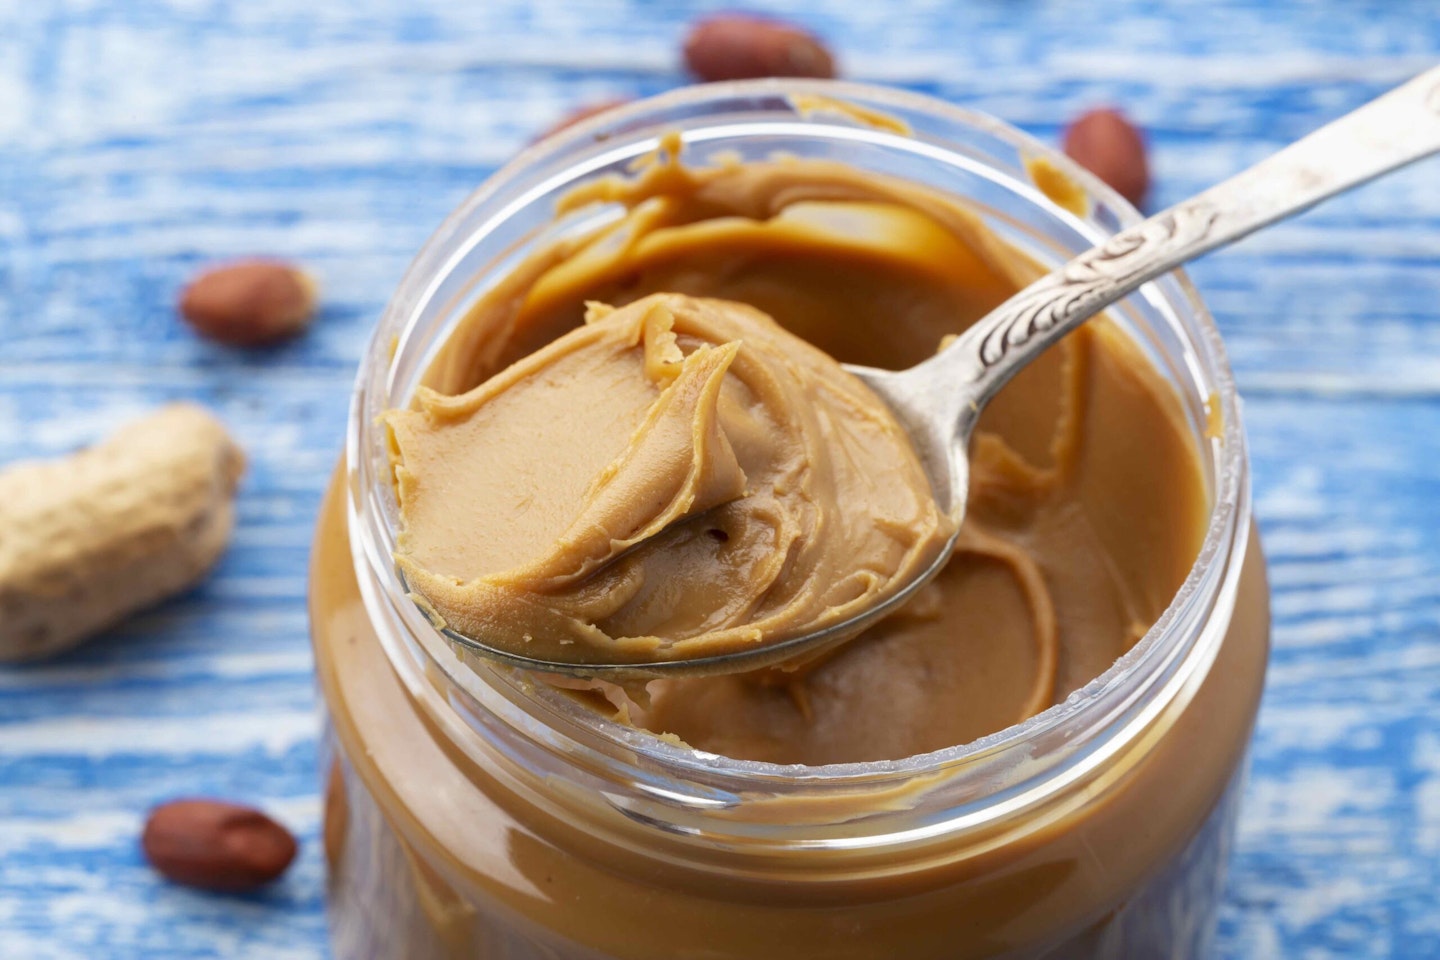 Peanut butter in an open jar and peanuts in the skin are scattered on the blue table